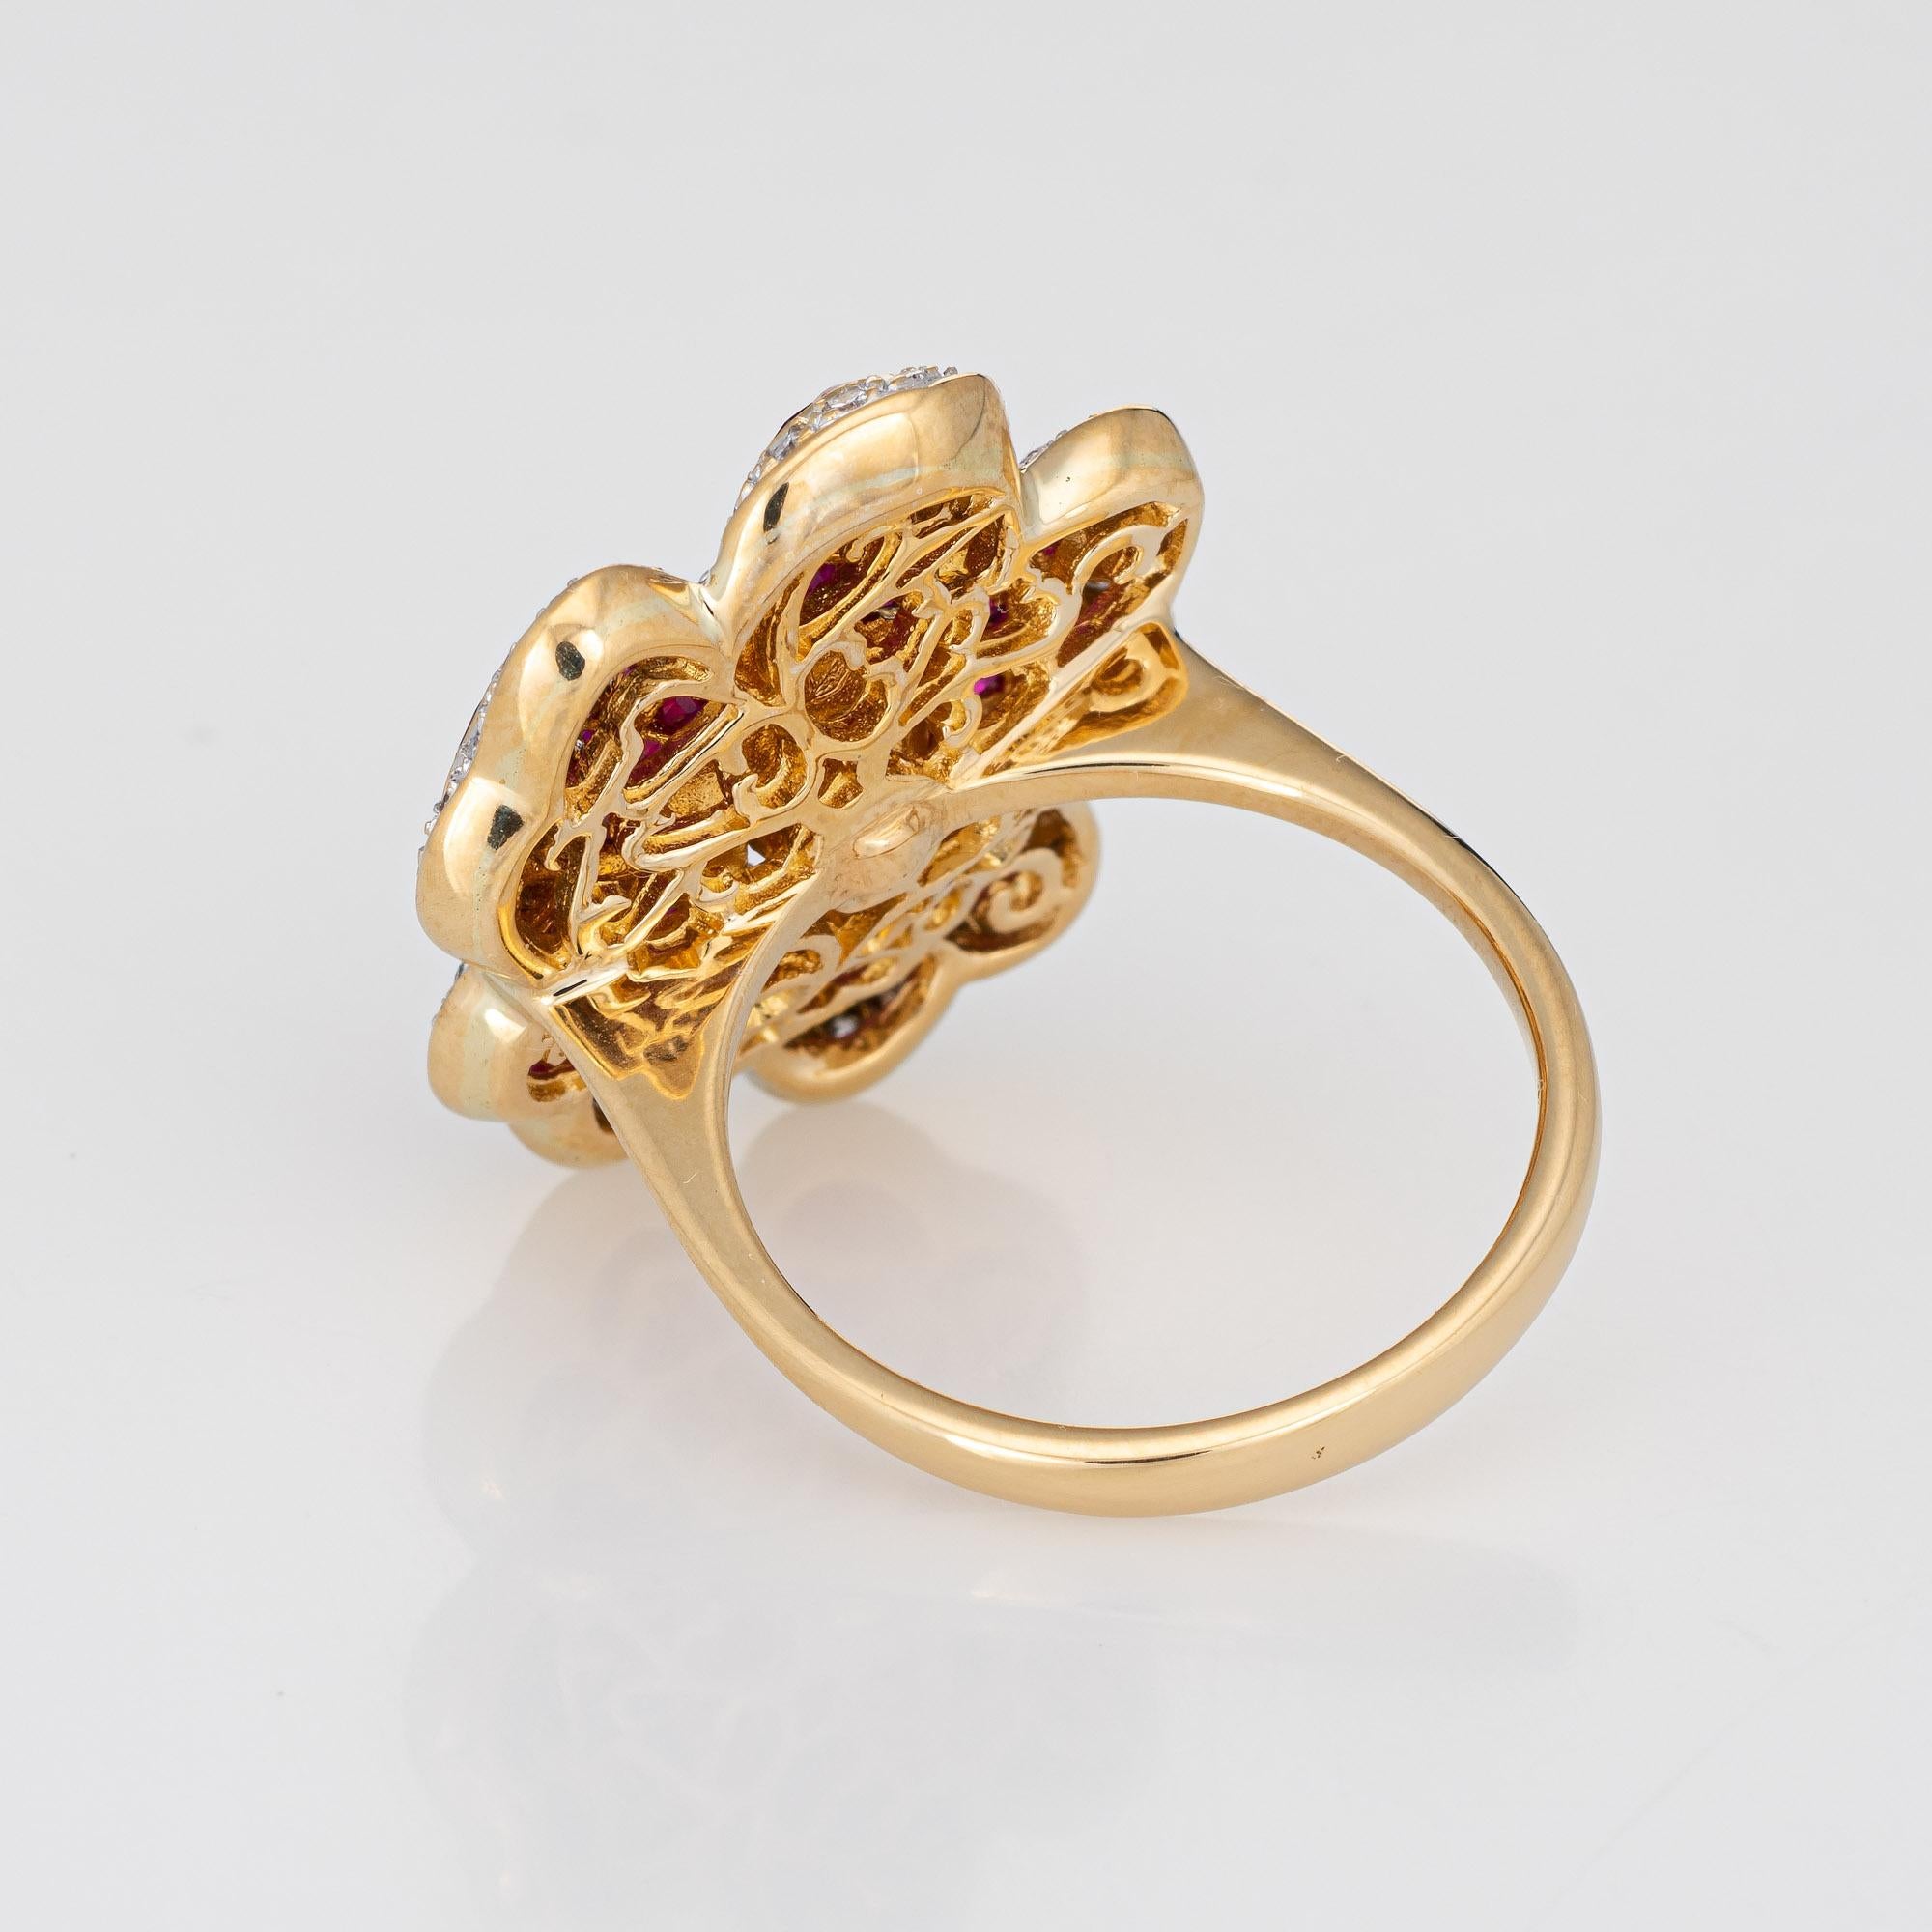 Round Cut Invisible Set Ruby Diamond Flower Ring Vintage 18k Yellow Gold Cocktail Jewelry